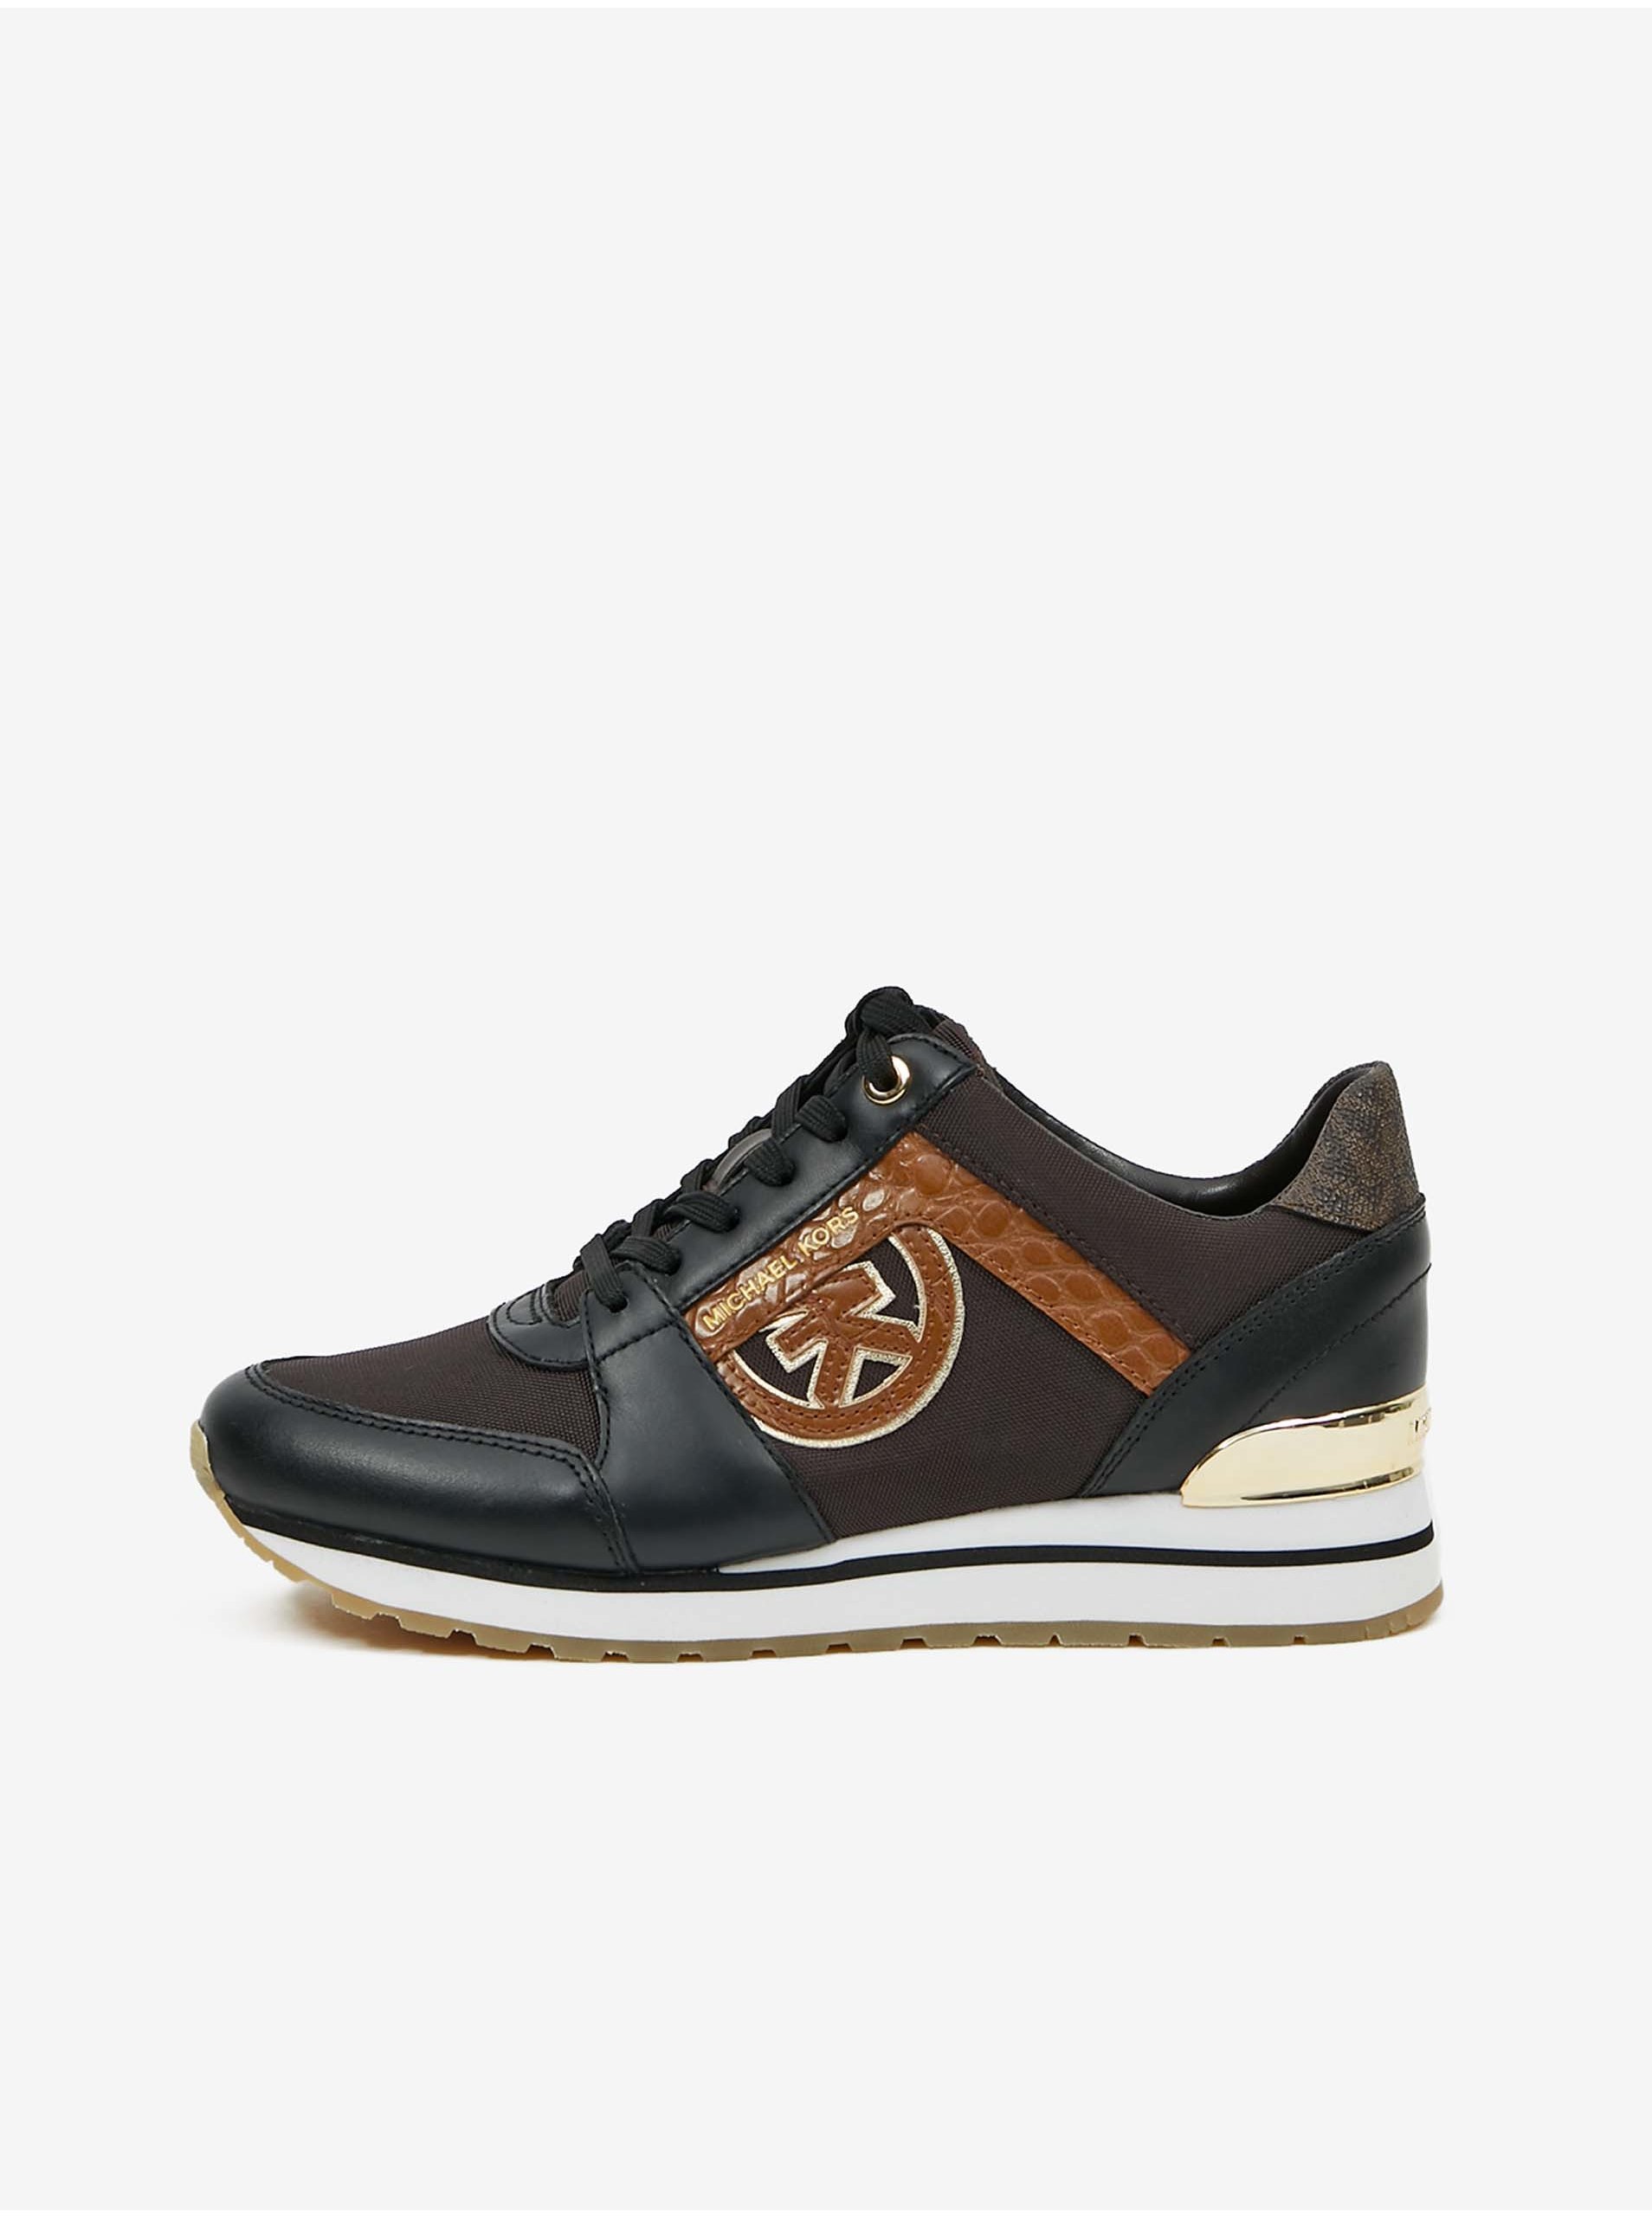 Michael Kors Trainer Black And Brown Women's Leather Sneakers - Women